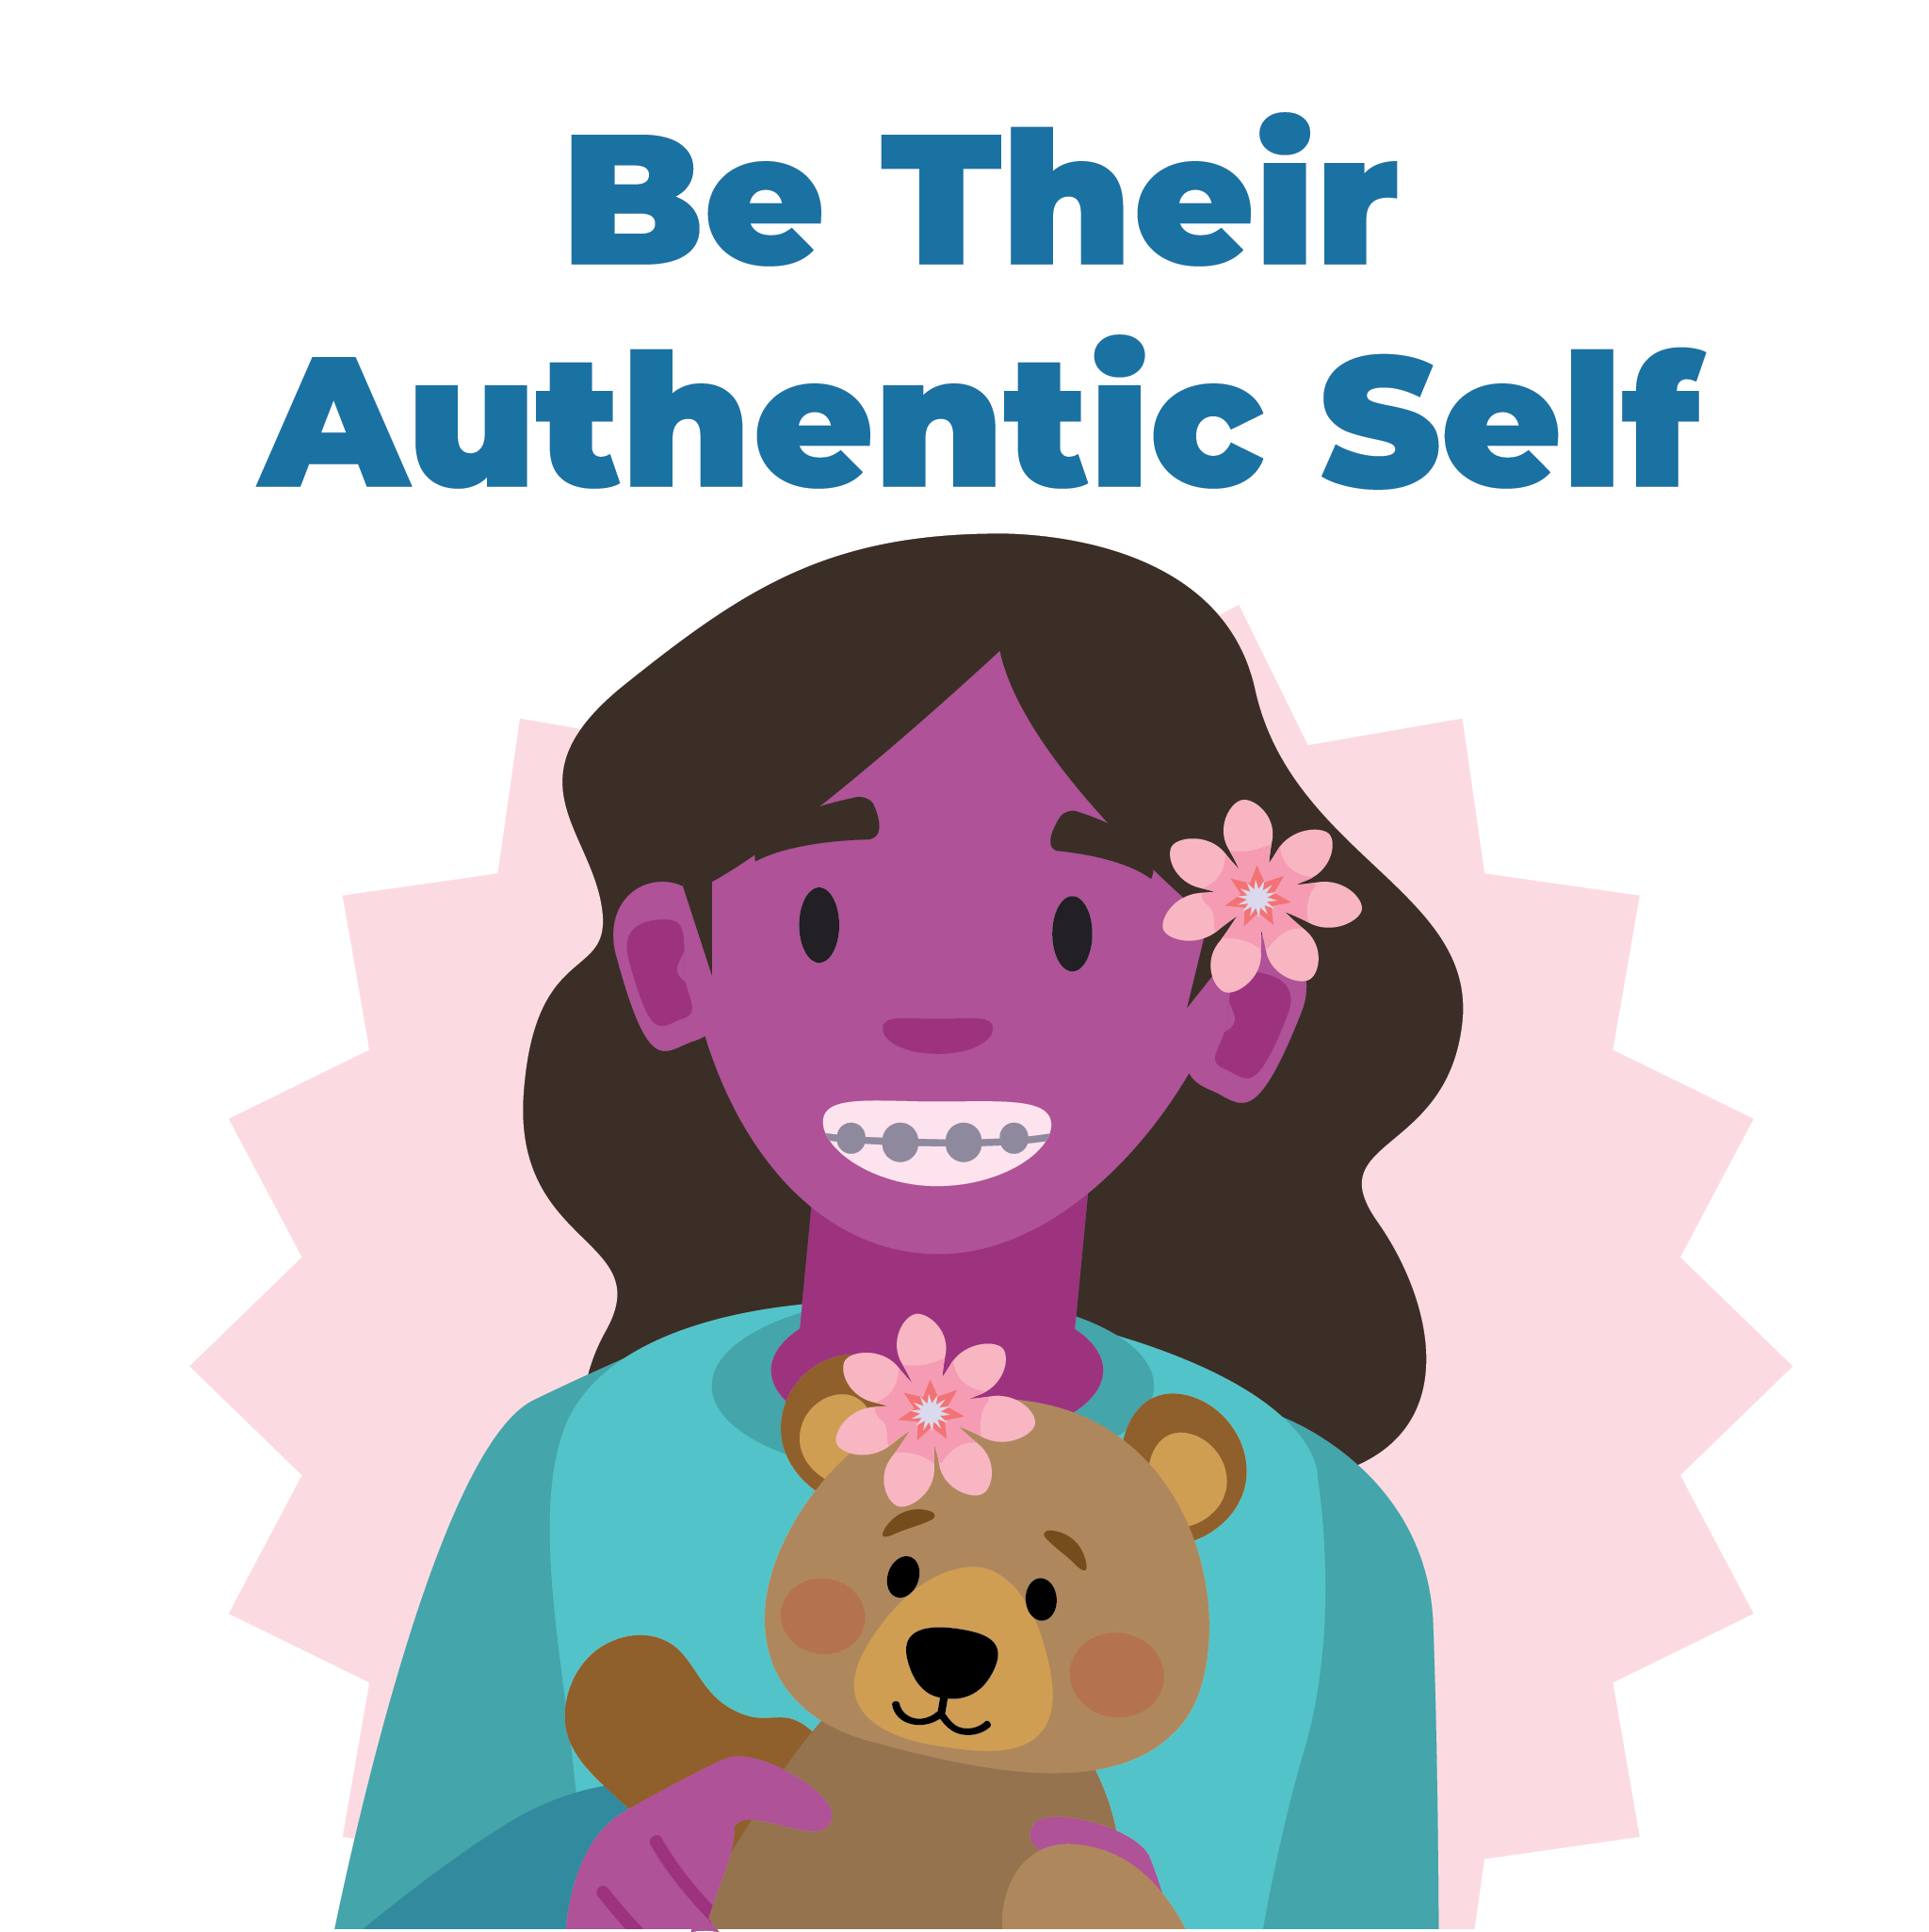 Be their authentic self.